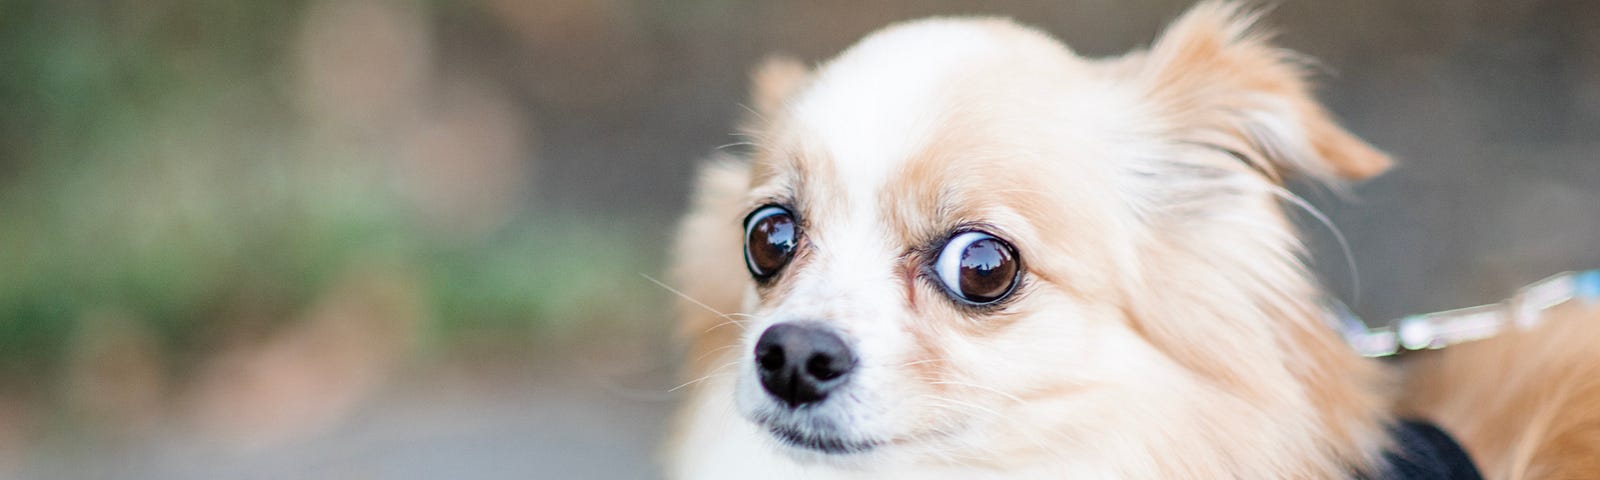 photo of a small dog looking confused, with eyes open wide